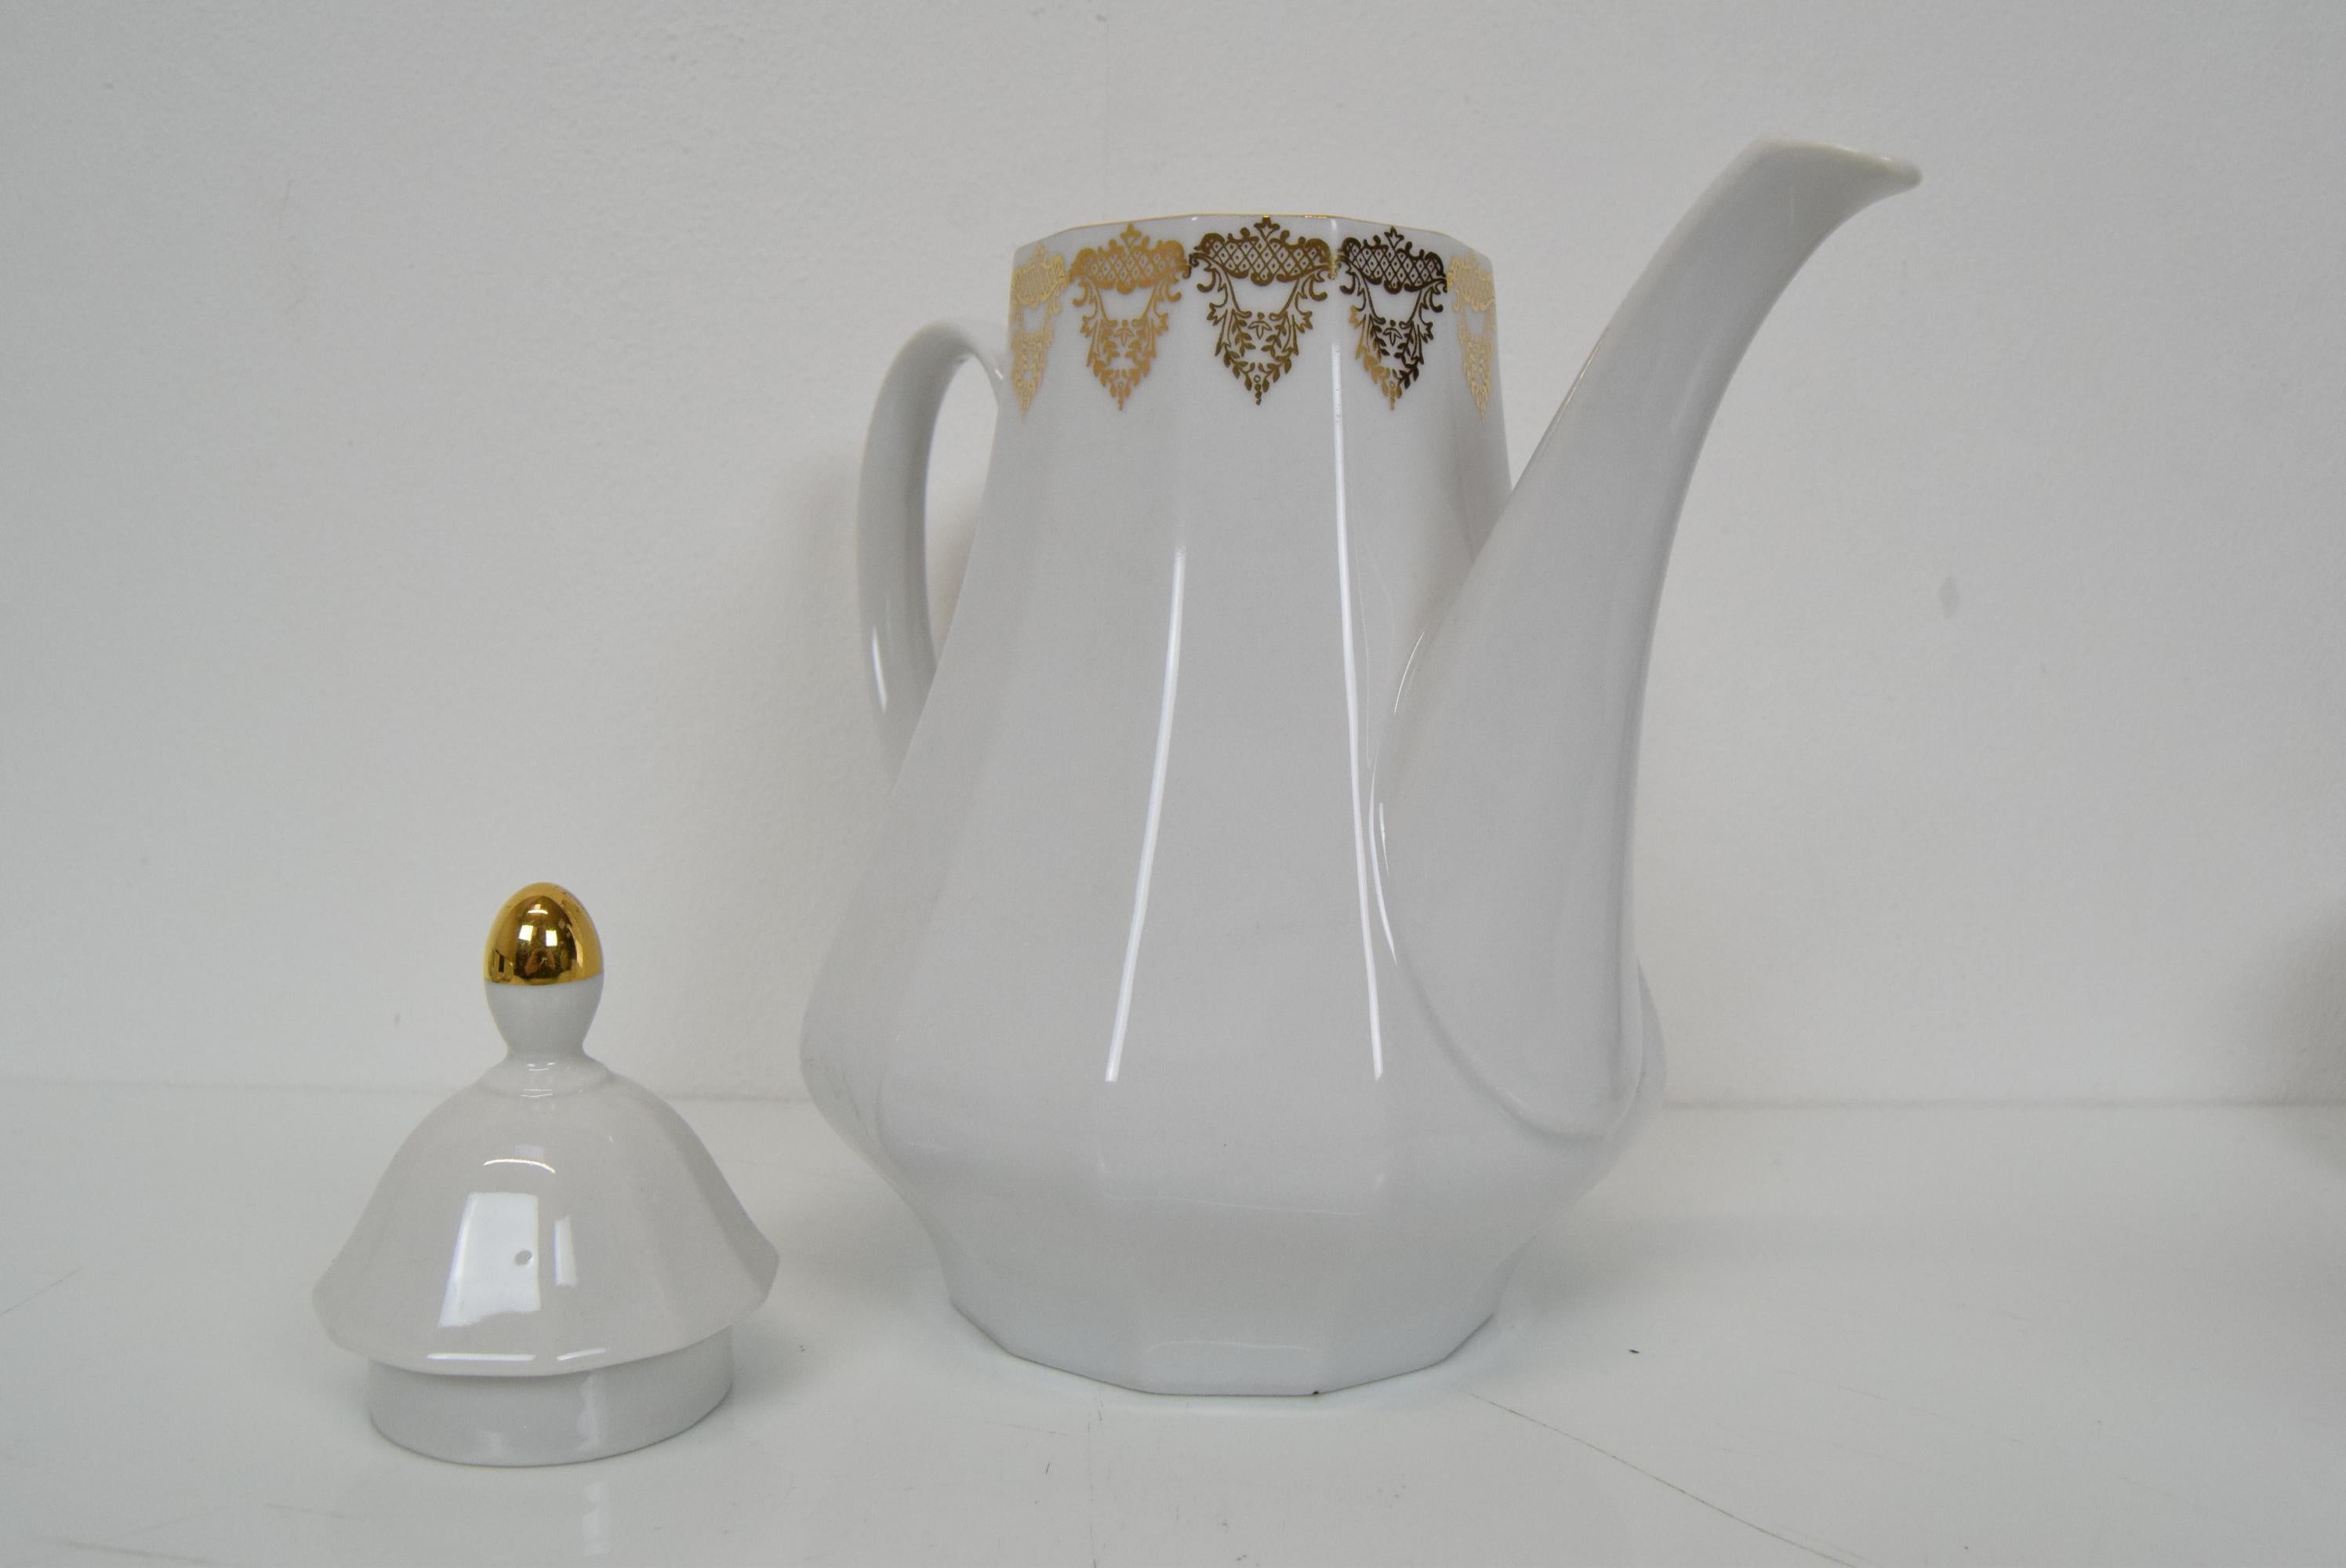 Mid-20th Century Set Porcelain for Tea or Coffee, Carlsbad Porcealin by Company Epiag D.F For Sale